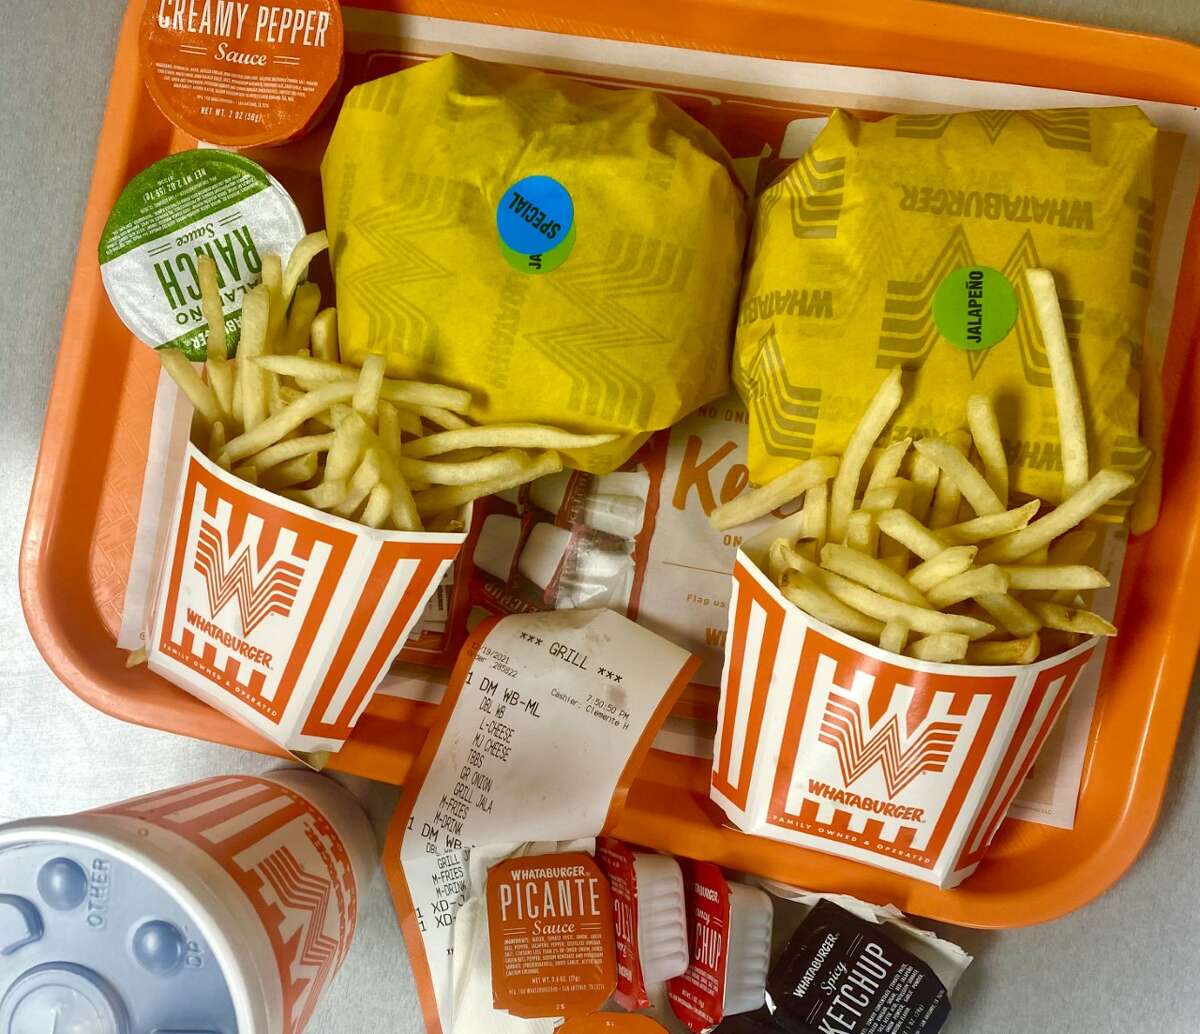 San Antonio, and possibly most of Texas, loves it's Whataburger. Except maybe for this TikTok user.